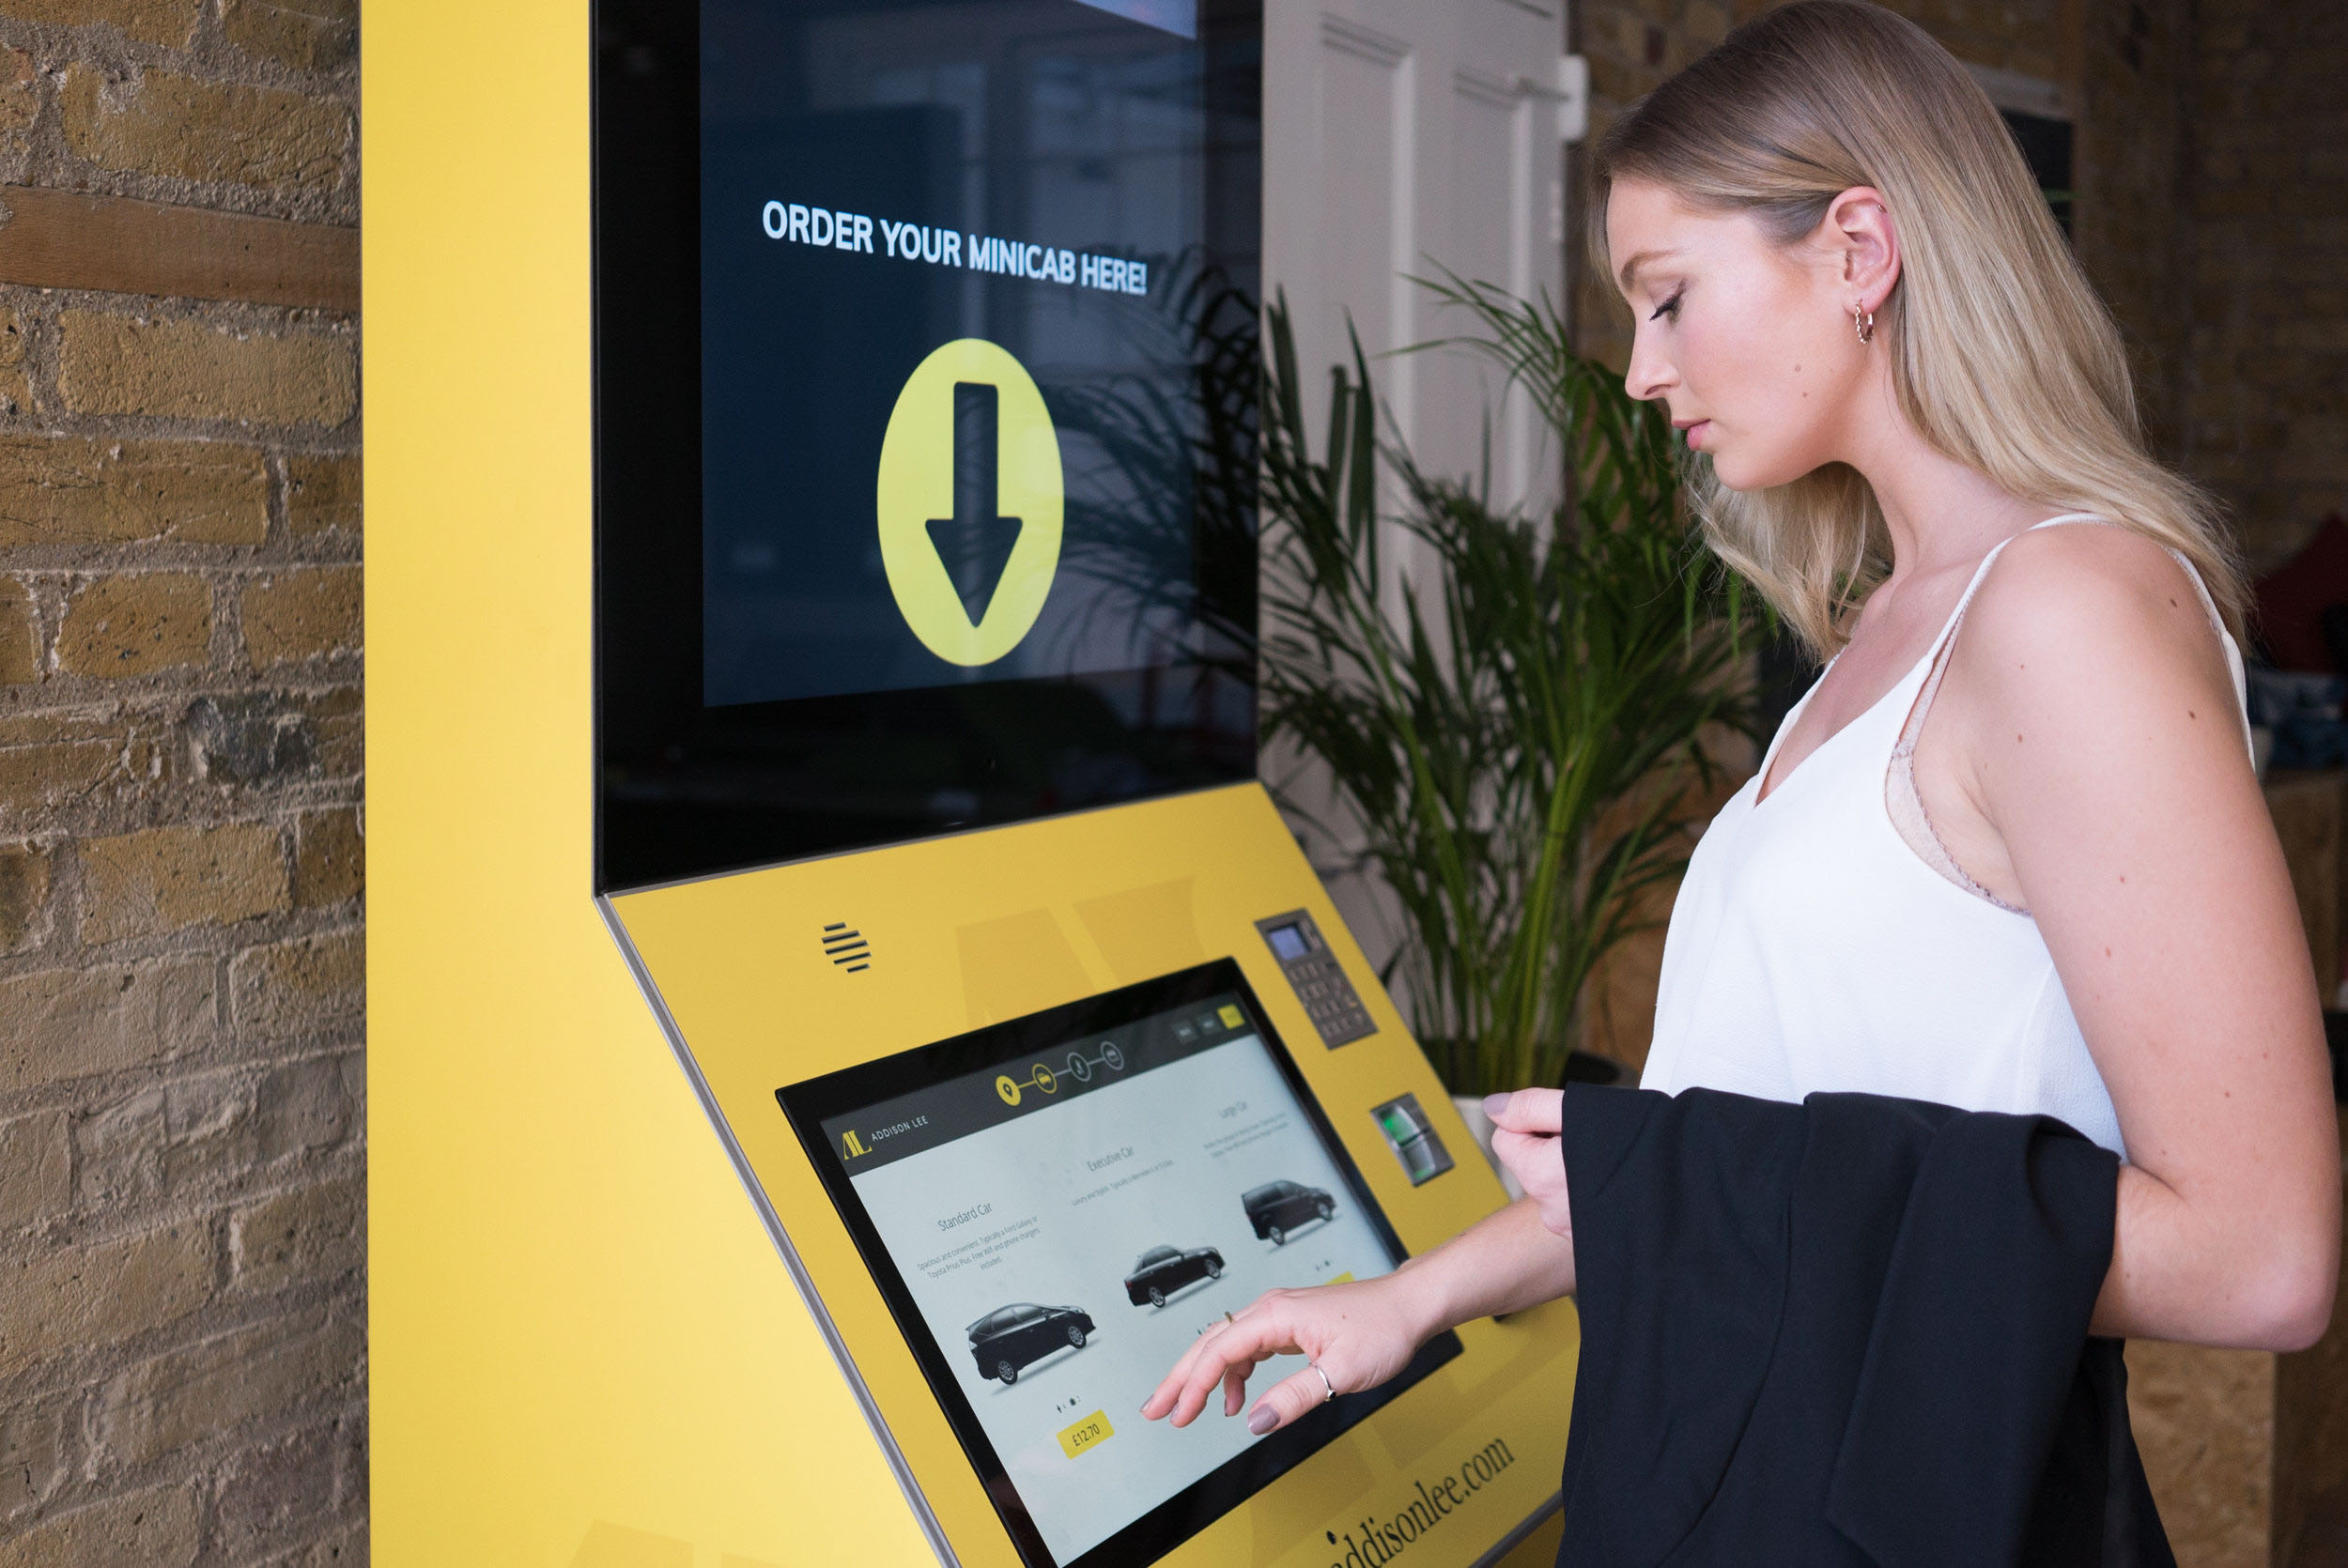  Multimedia Kiosks for Taxis - Benefits